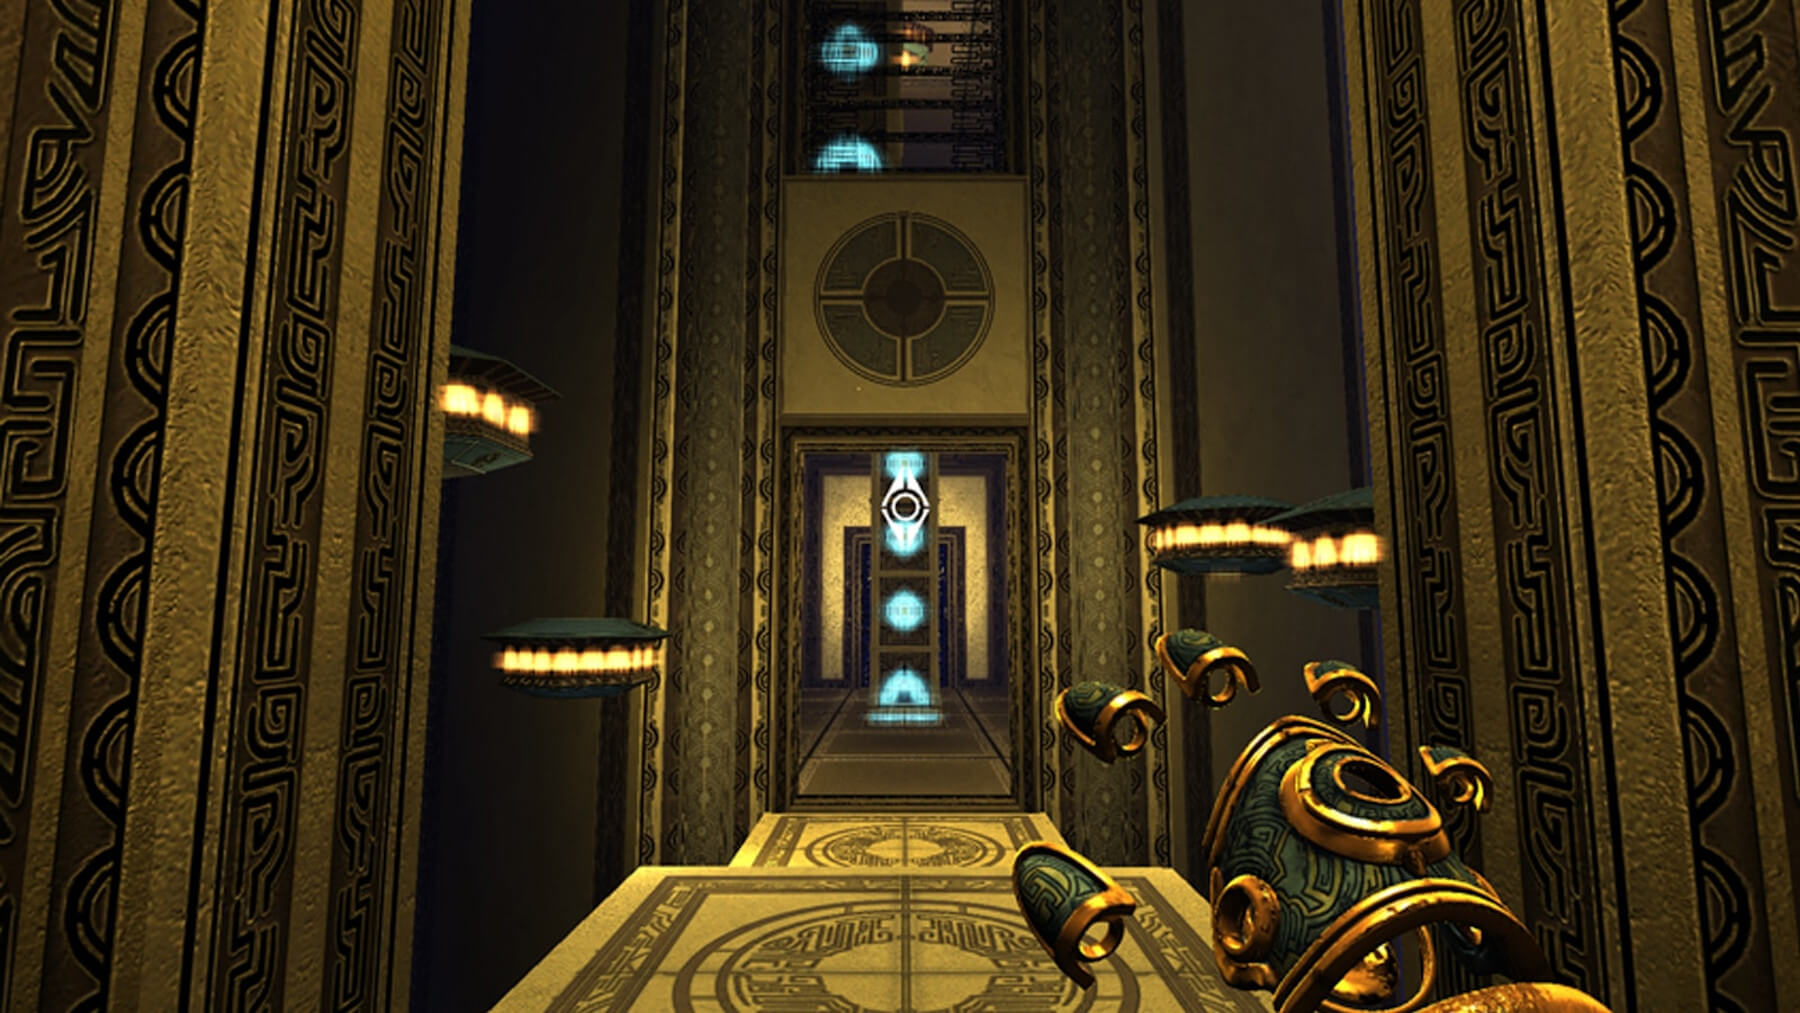  The Cloud Temple screenshot depicting temple interior with golden floors and columns.